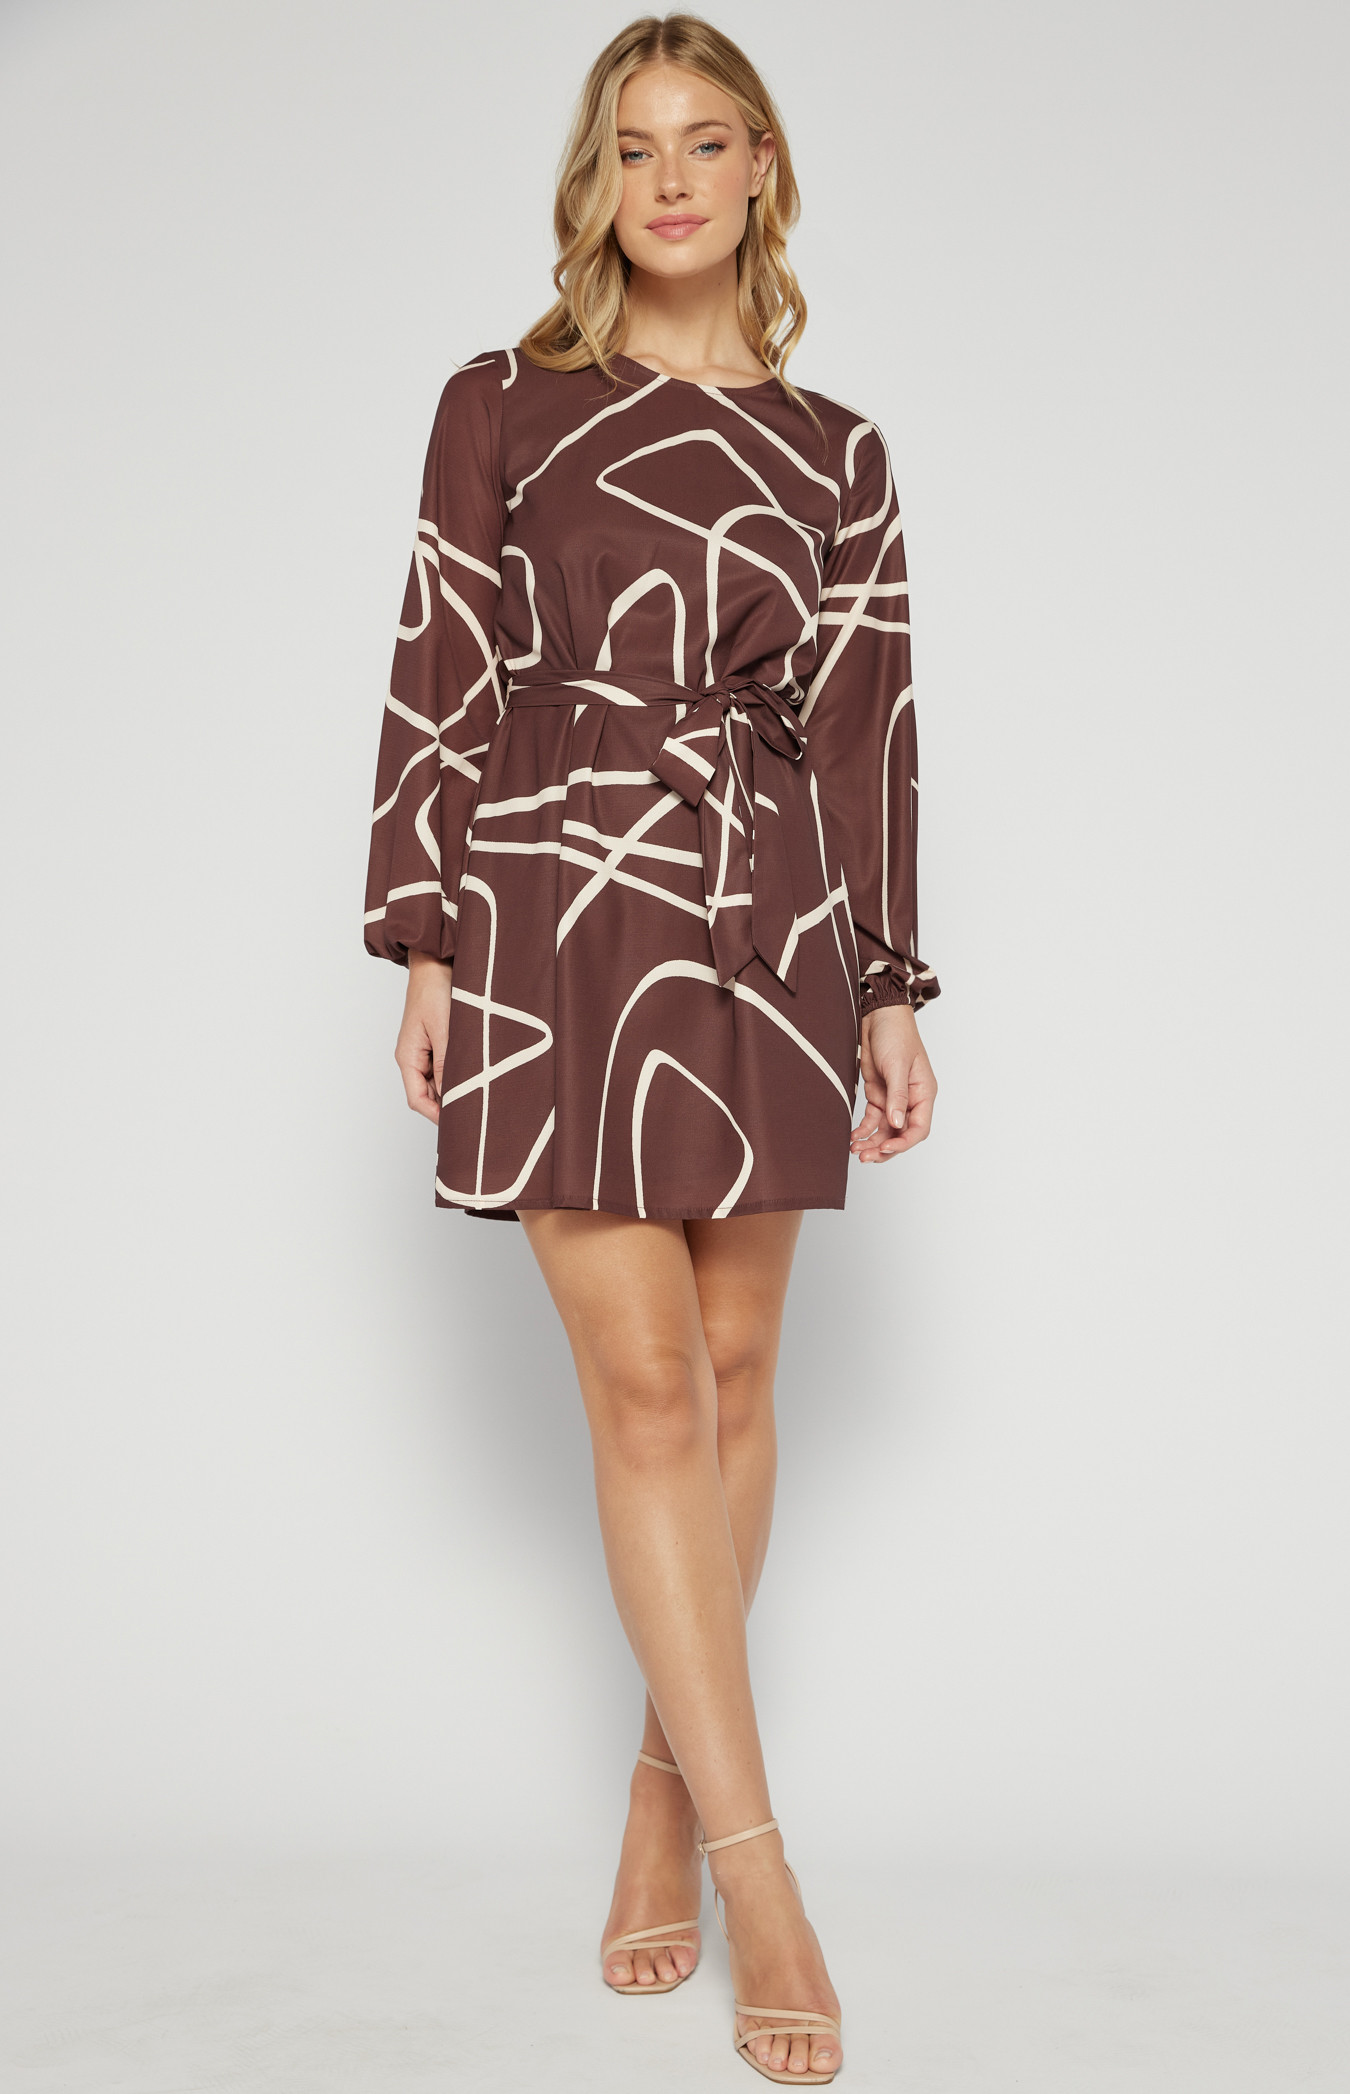 Abstract Printed Round Neck Shift Dress (SDR547-4B)